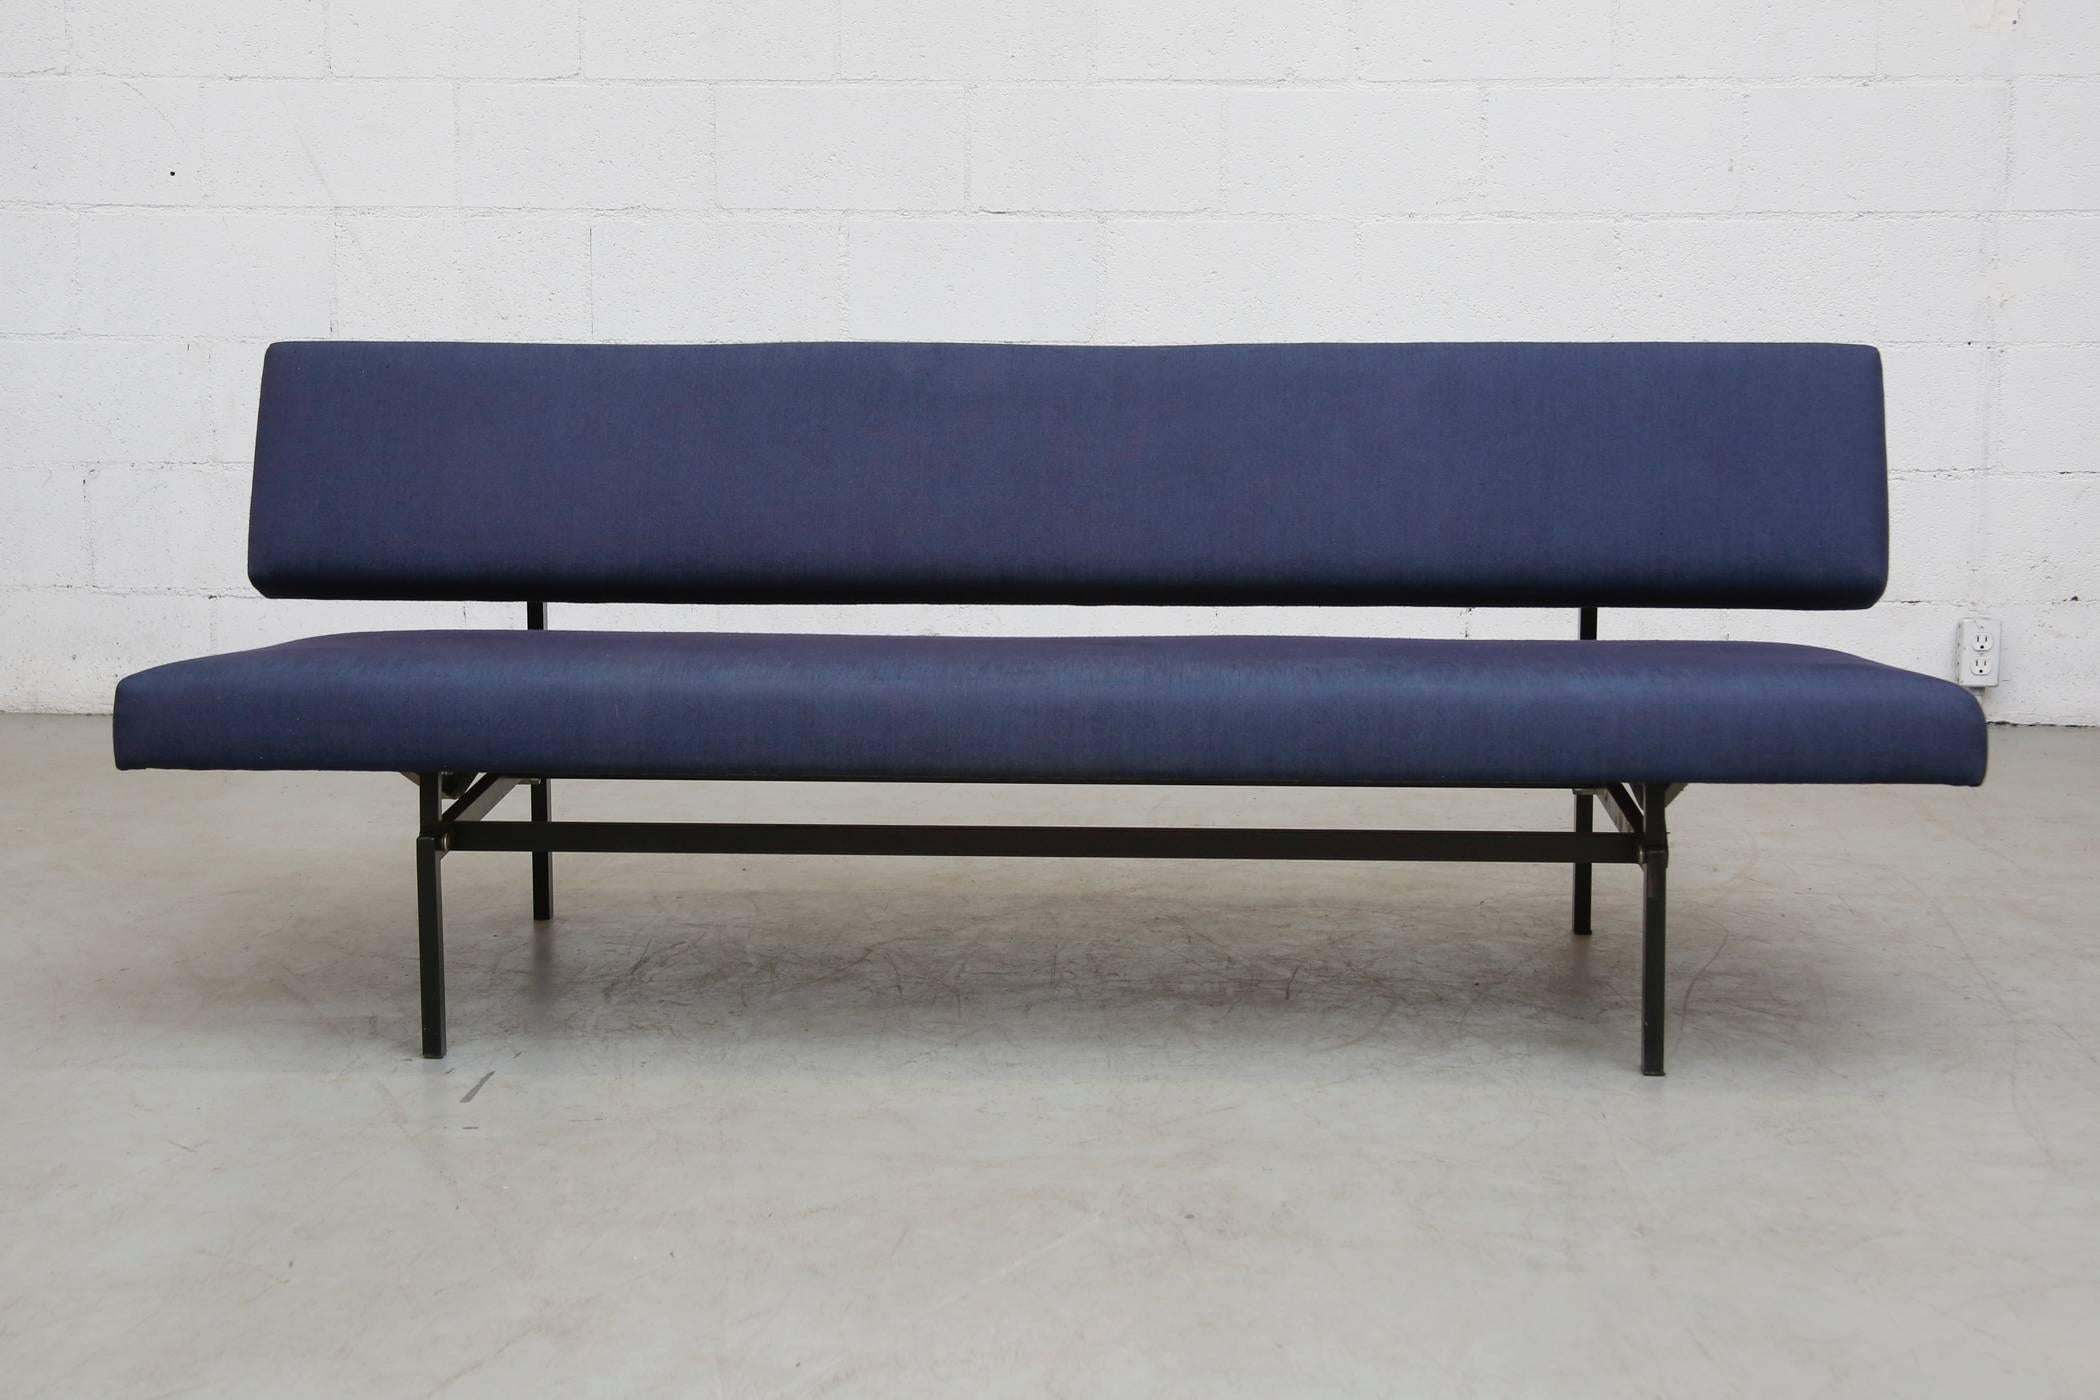 Navy upholstered Martin Visser sleeper sofa with pull-out bench that levels to a single bed for your guest. Fabric has faded stripe on upholstery, frame in good original condition with wear consistent with age and use.